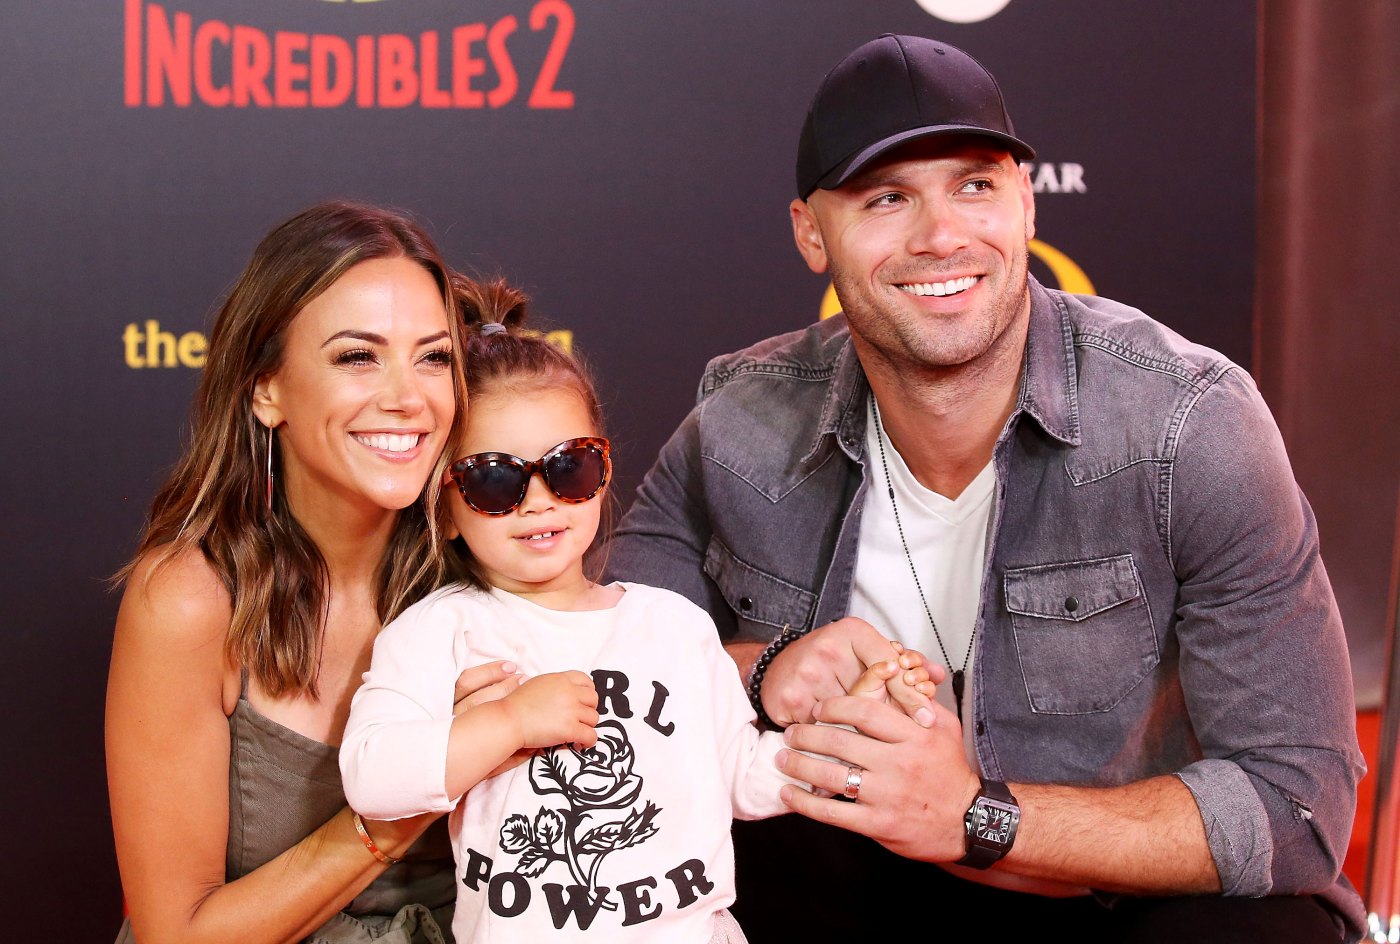 Jana Kramers Husband Daughter Freak Out Over Her Song On The Radio